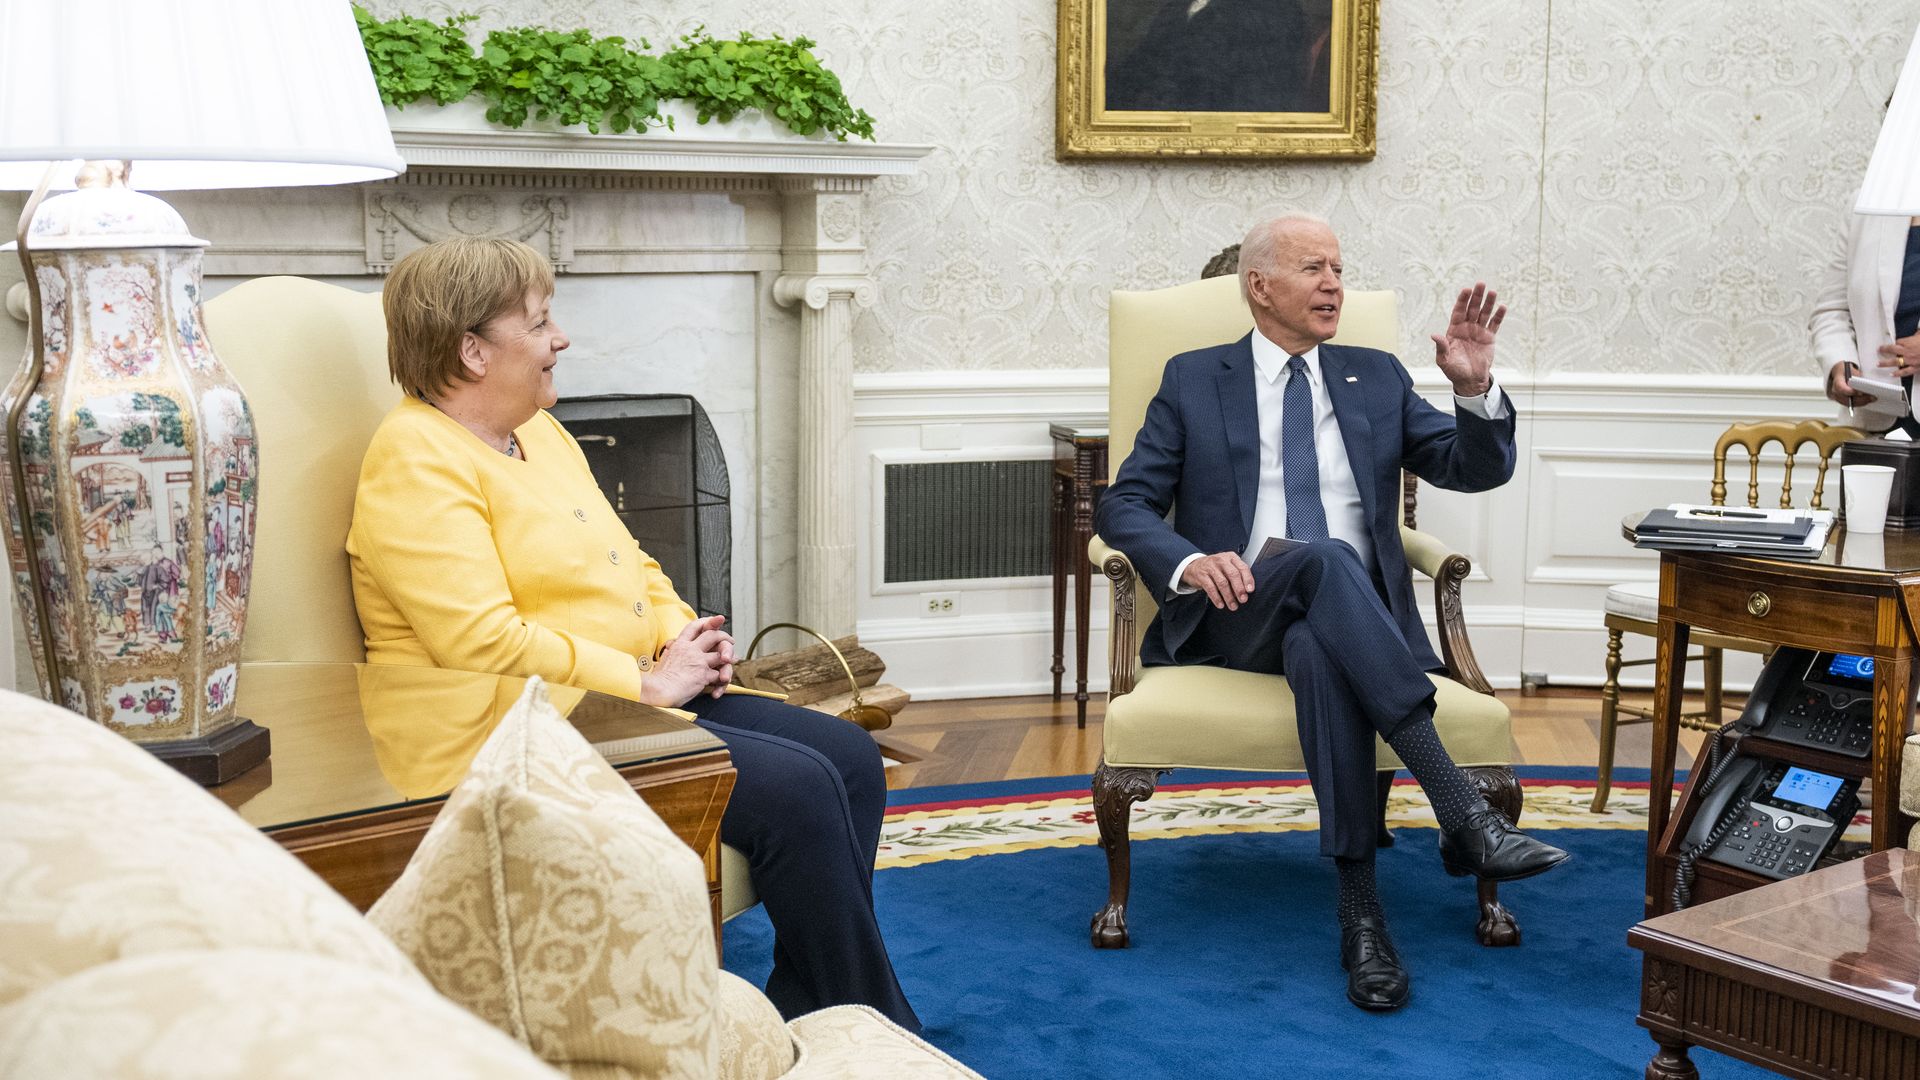 President Biden is seen sitting with German Chancellor Angela Merkel in the Oval Office.